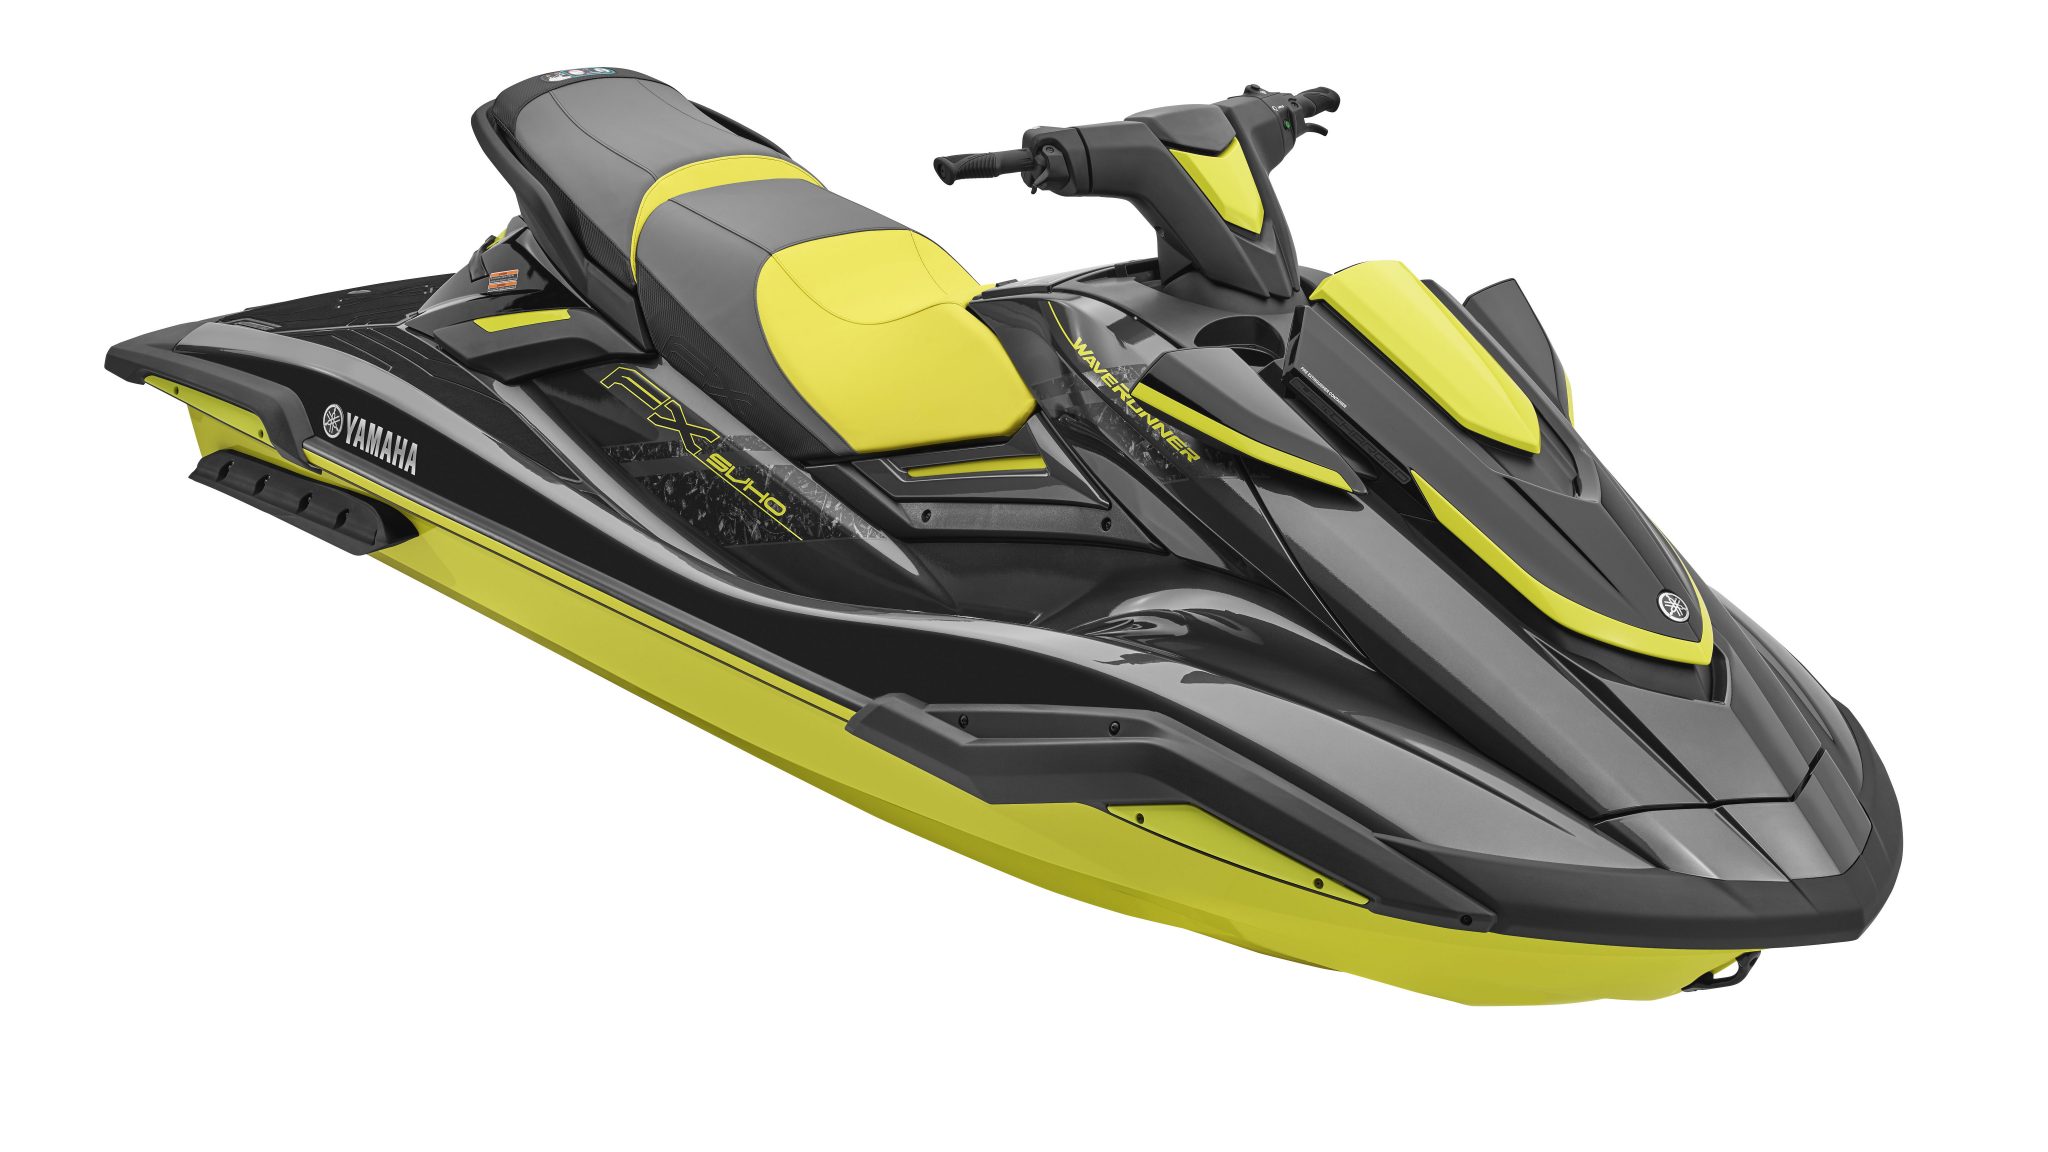 2021 Yamaha WaveRunner prices announced, stock shortages nationwide